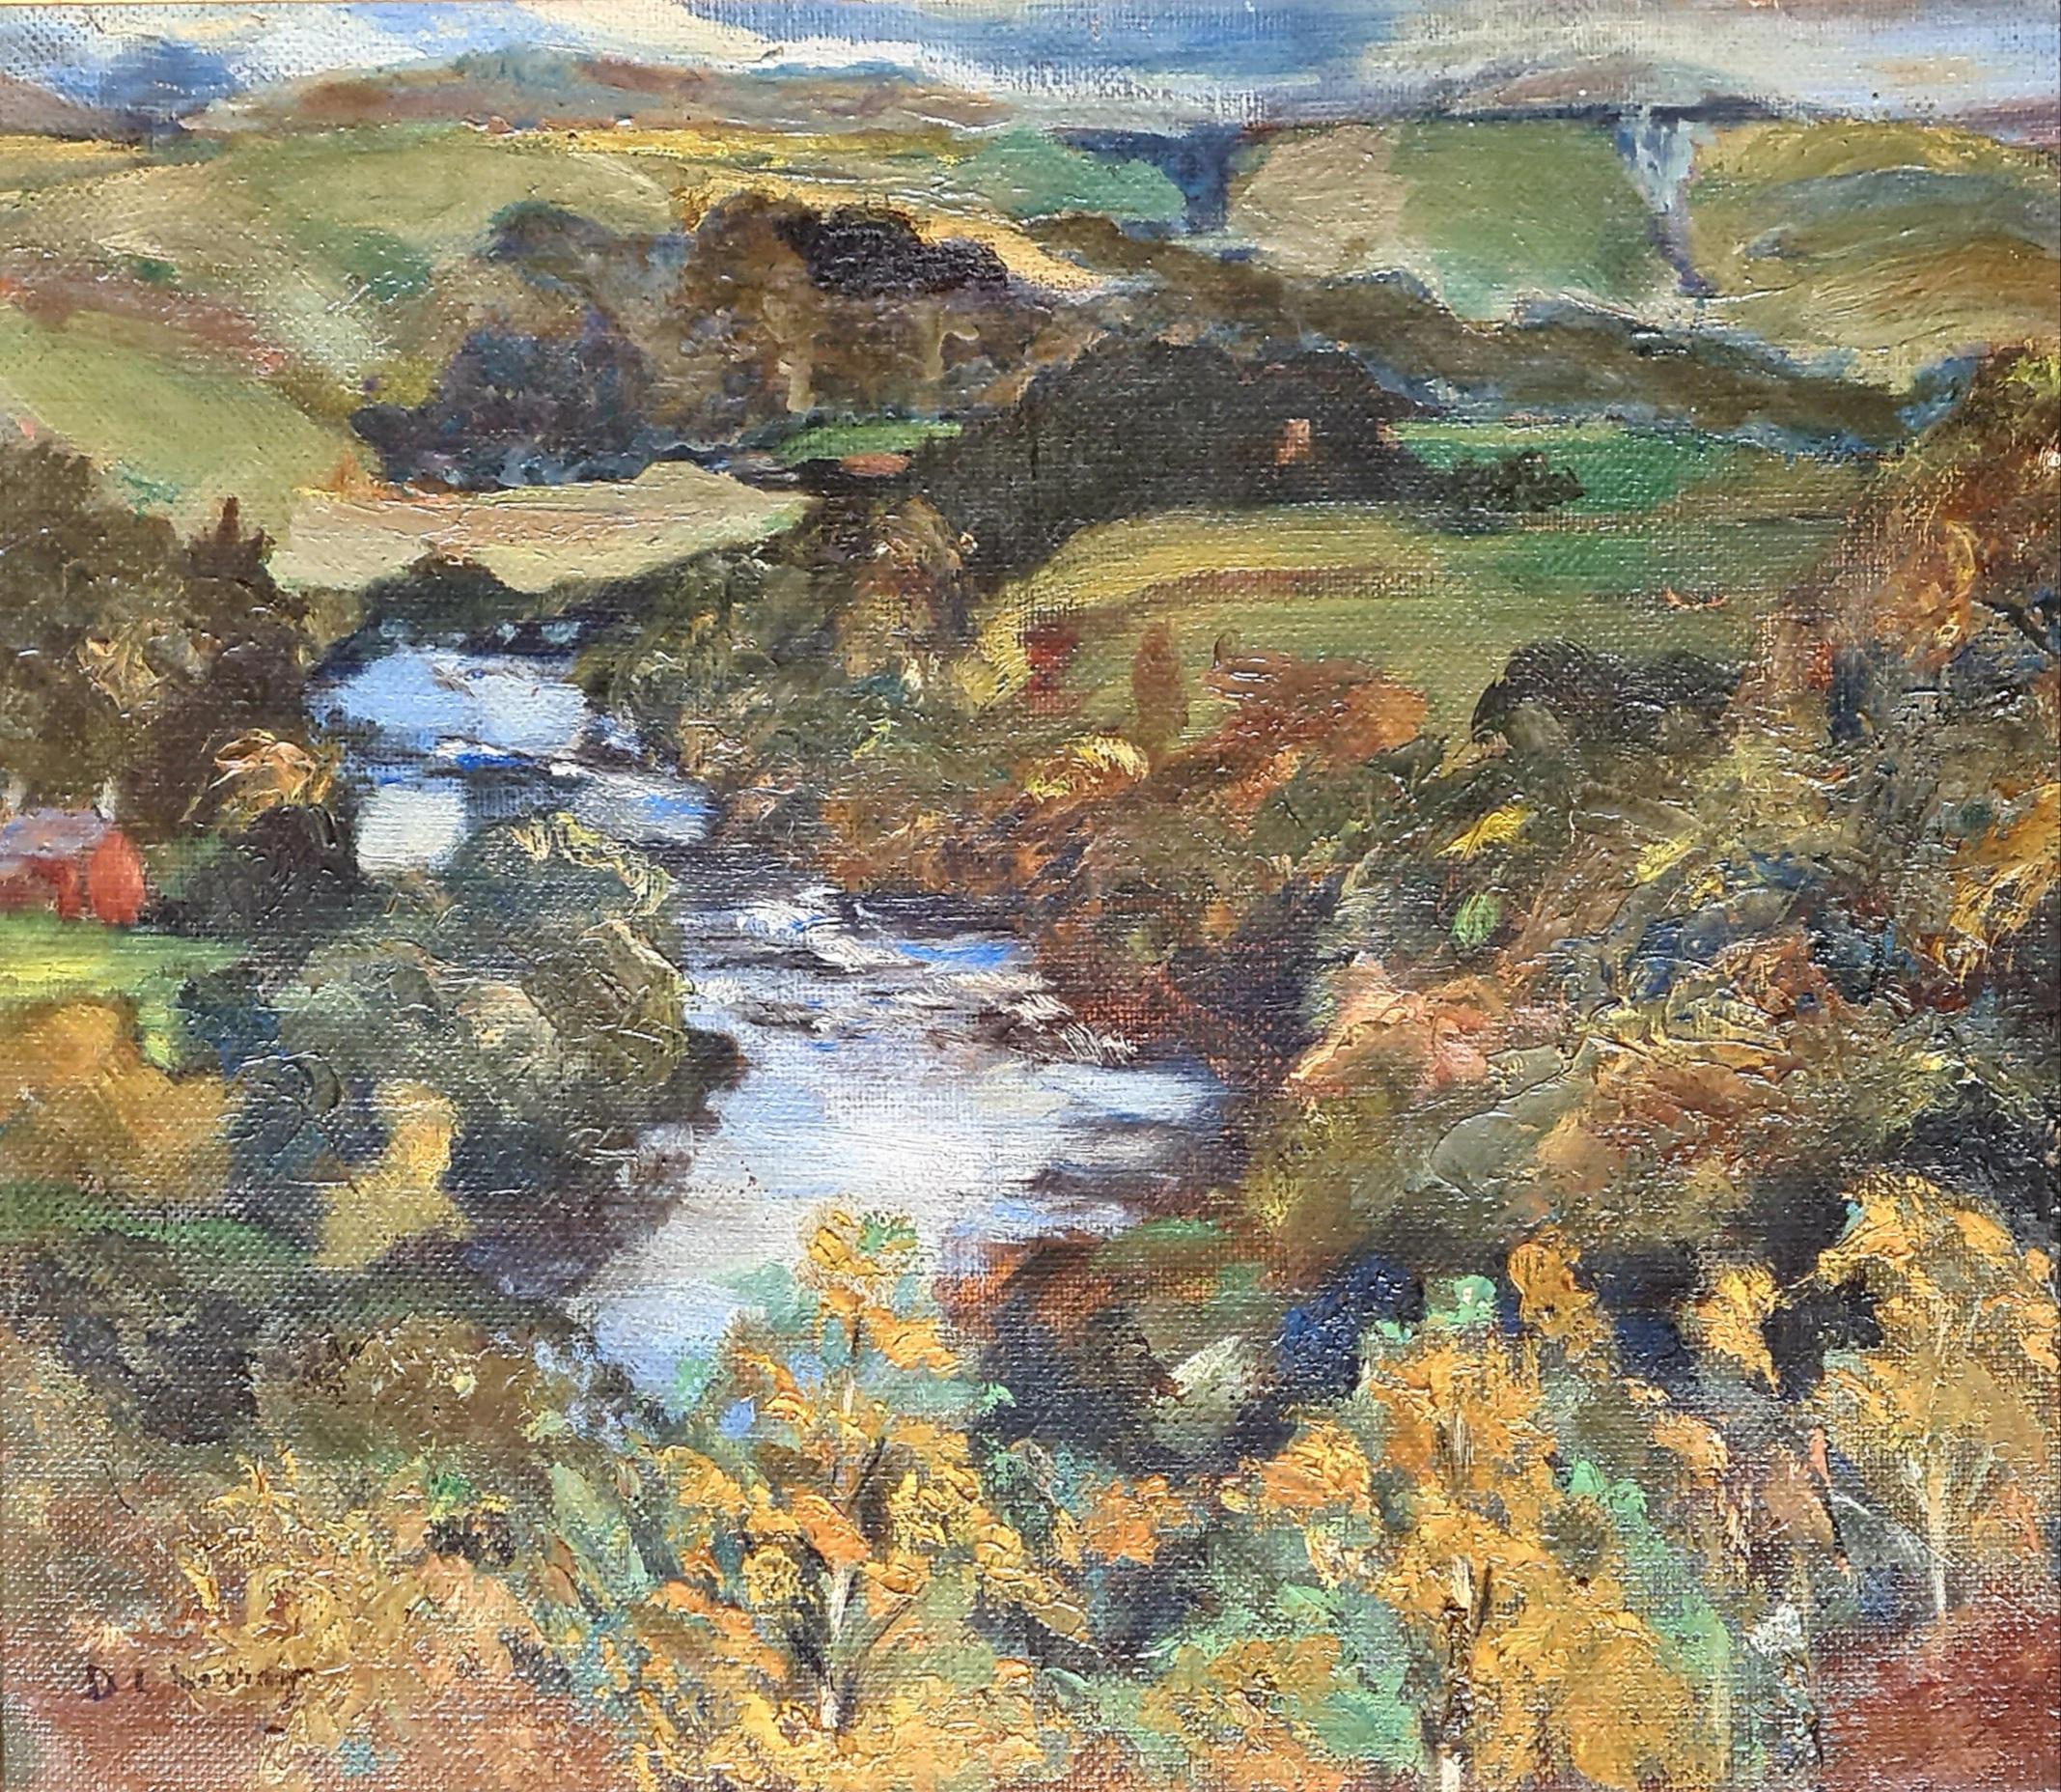 D. L. Murray Animal Painting - Impressionist Oil on Canvas, The Salmon Pool, Canonbie, Scotland